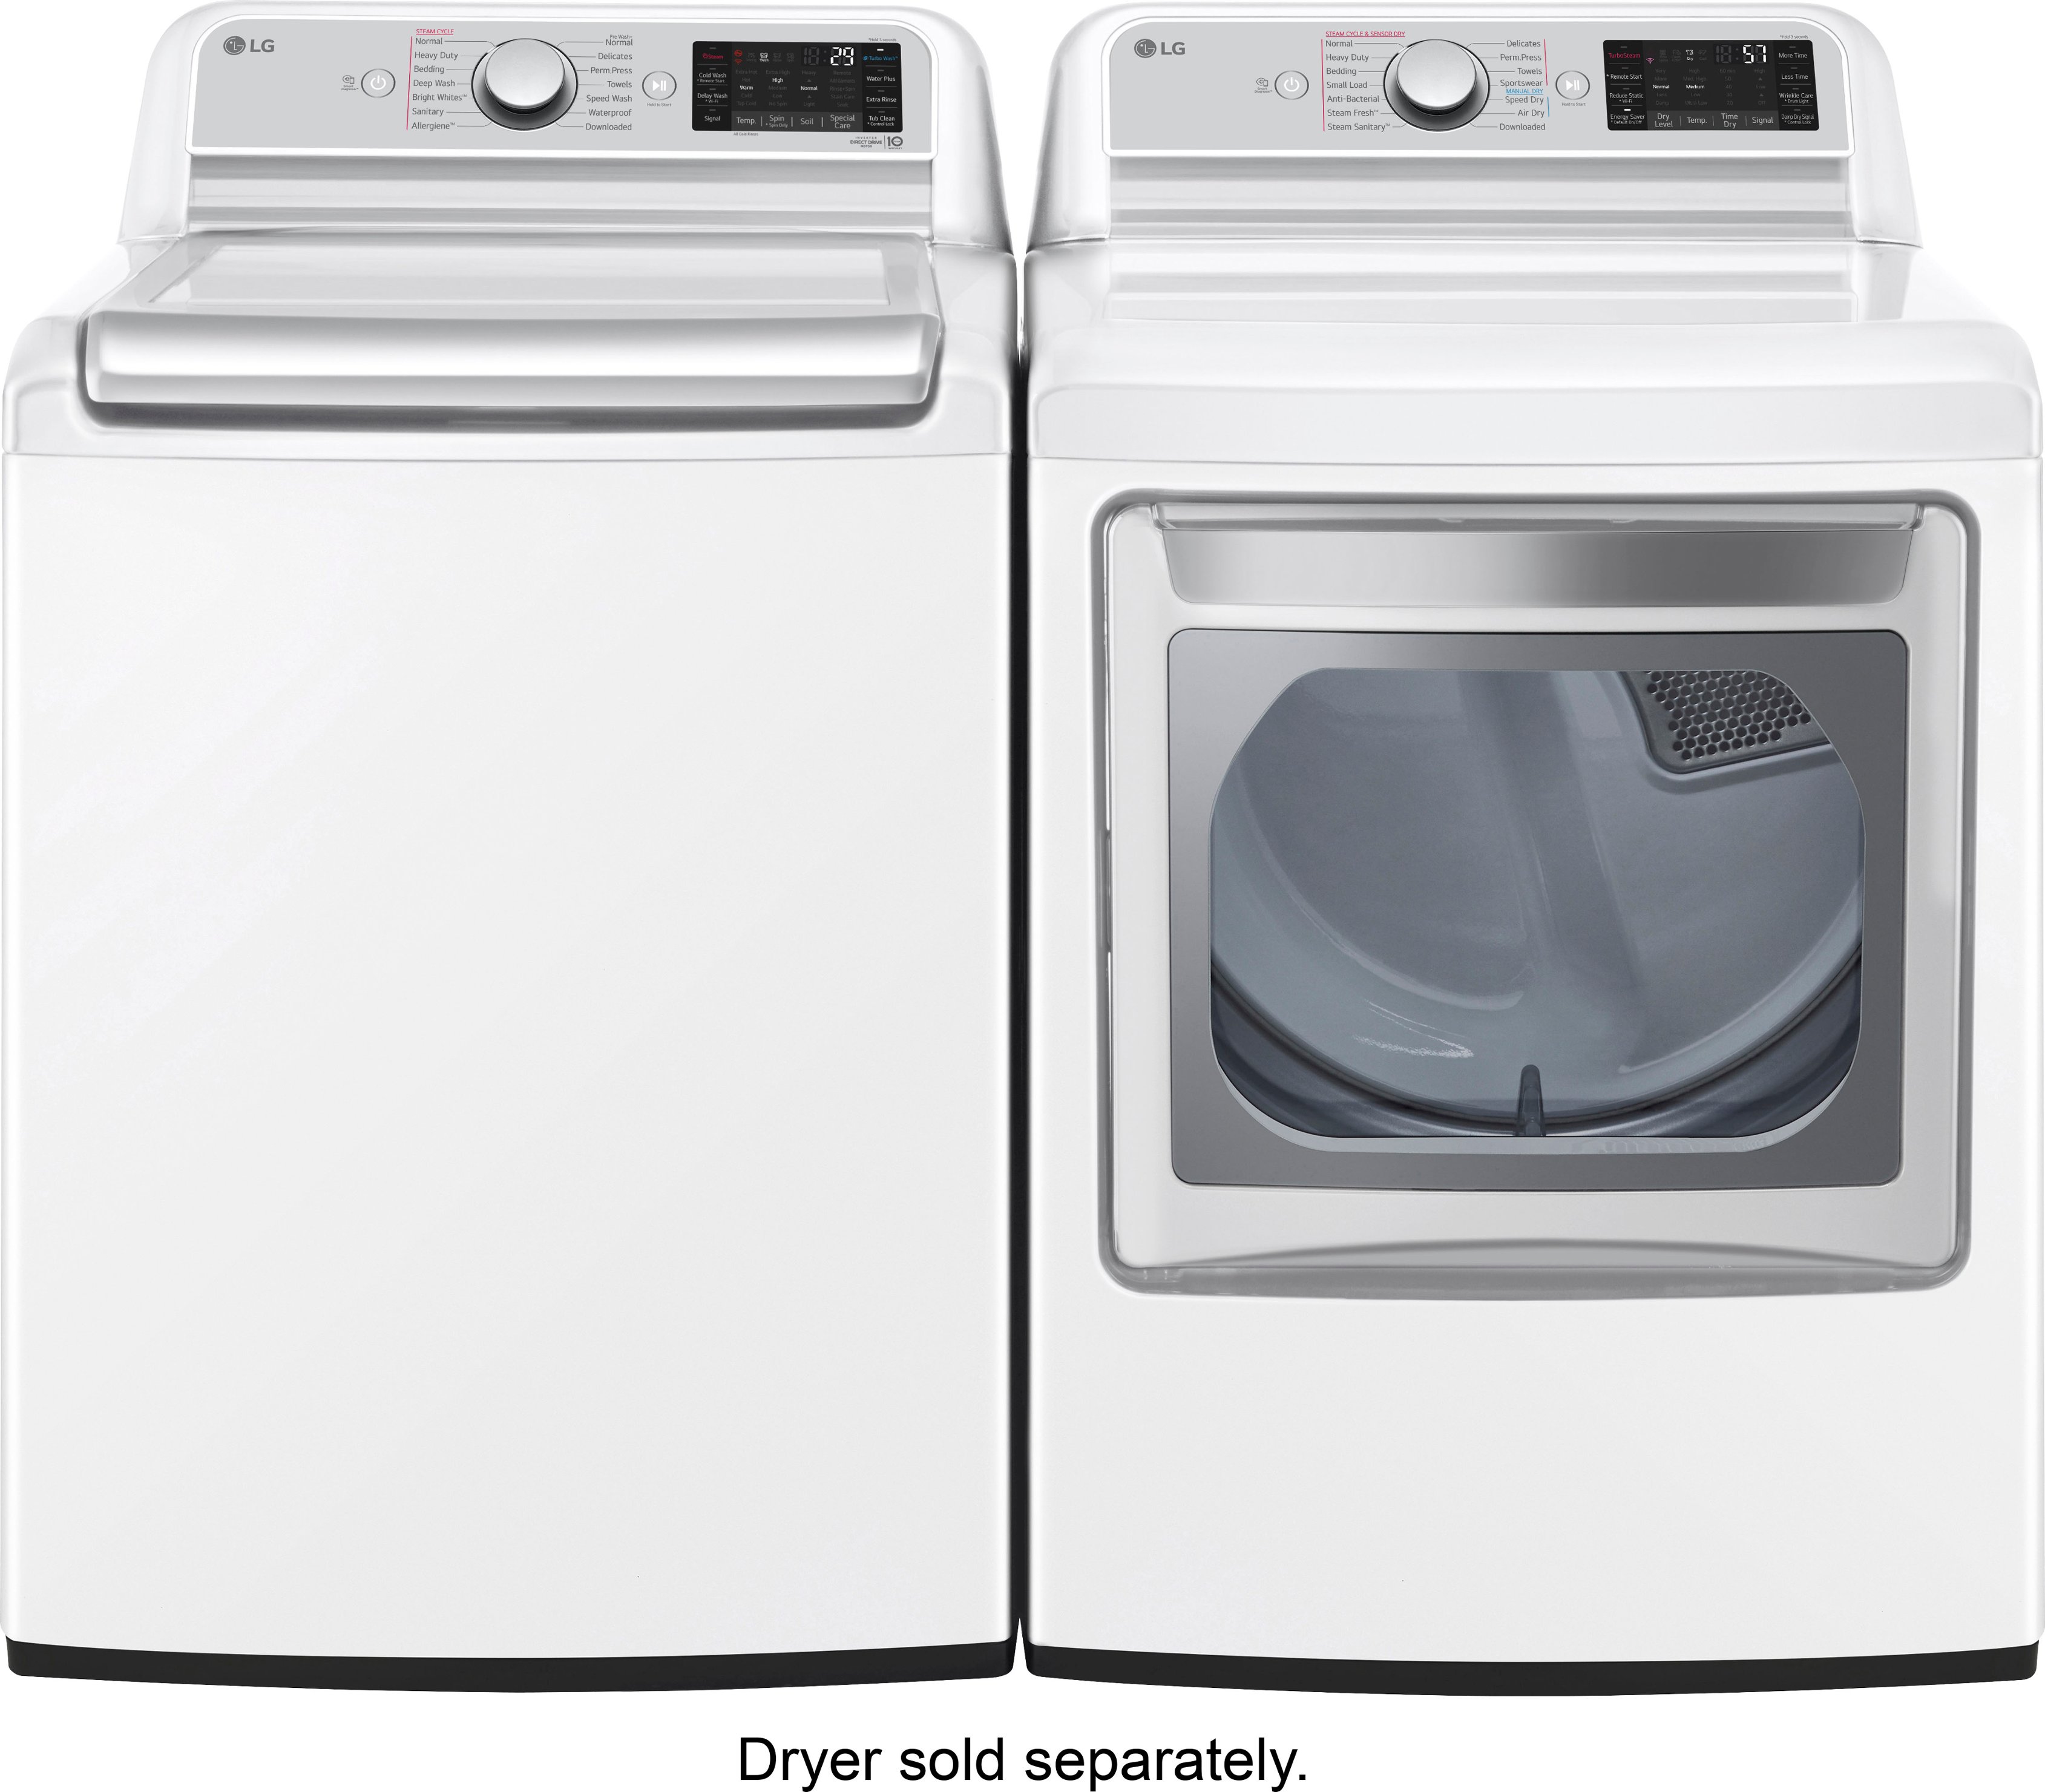 Angle View: LG - 5.5 Cu. Ft. High-Efficiency Smart Top Load Washer with Steam and TurboWash3D Technology - White